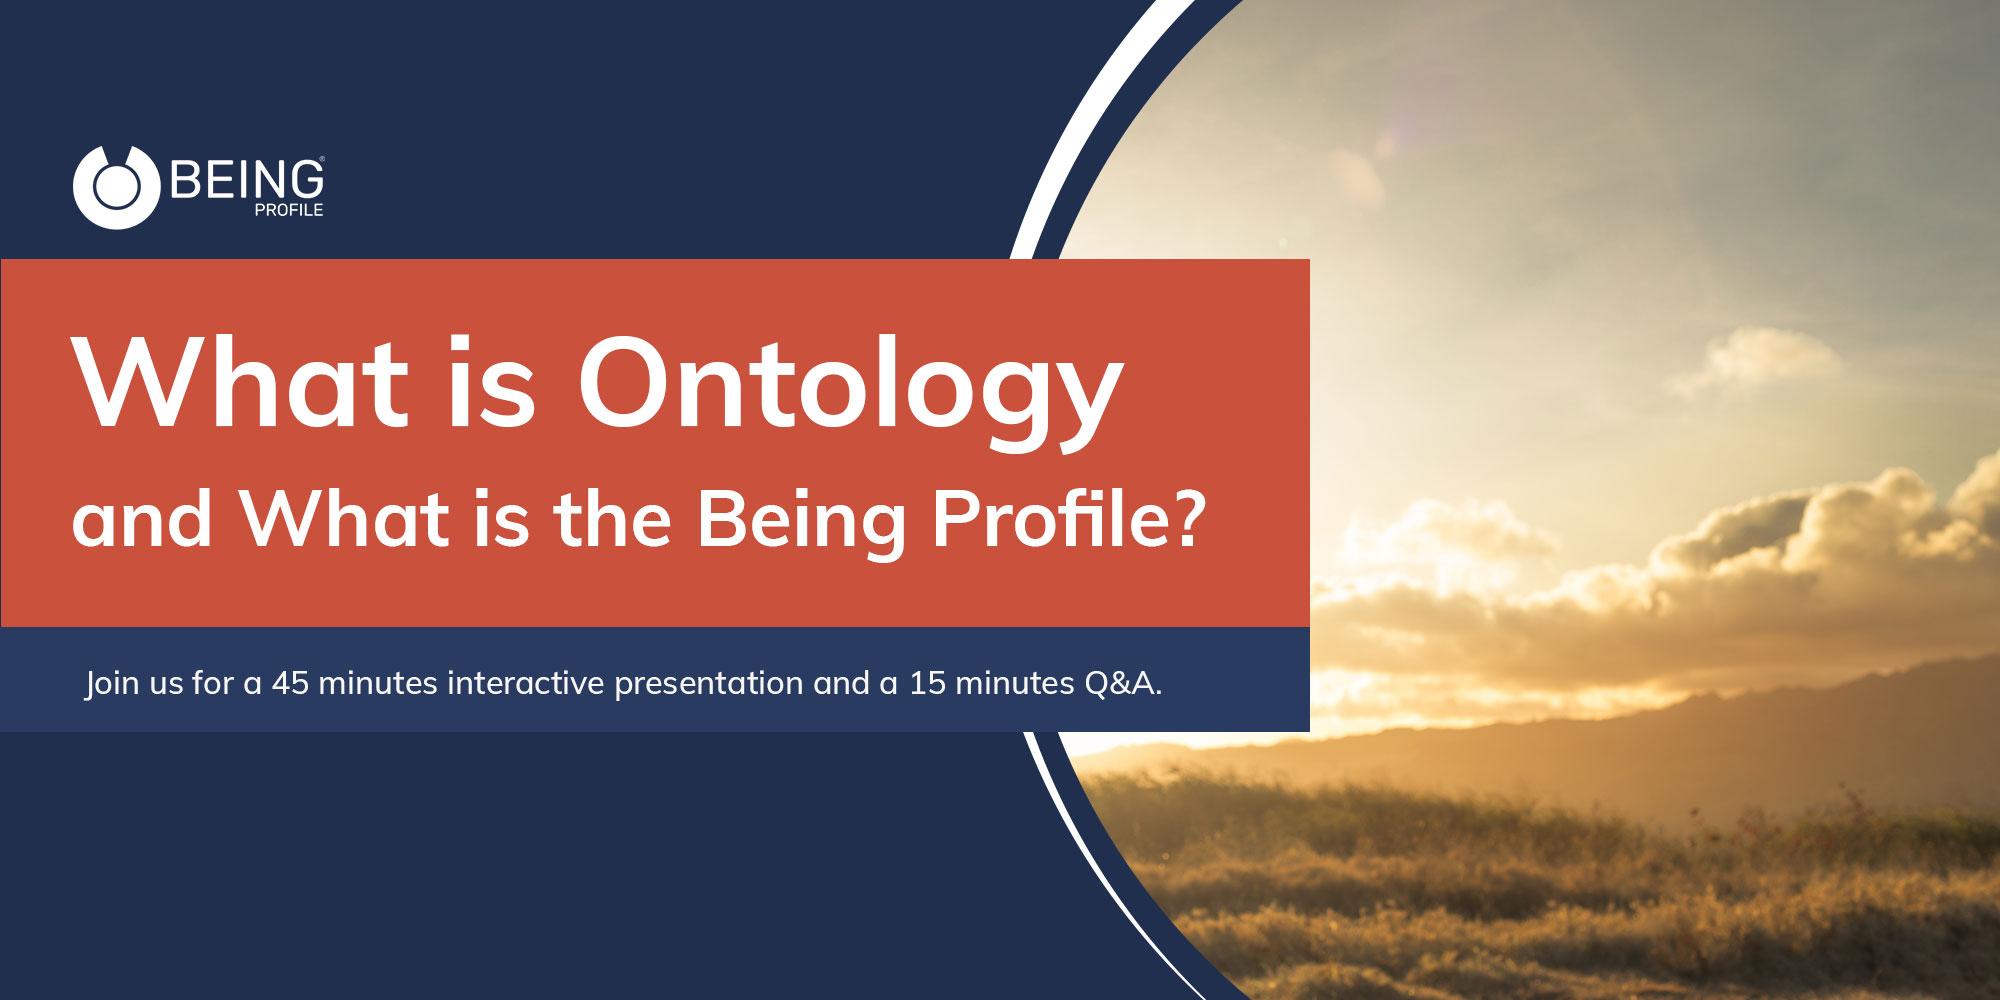 What is Ontology and What is the Being Profile?